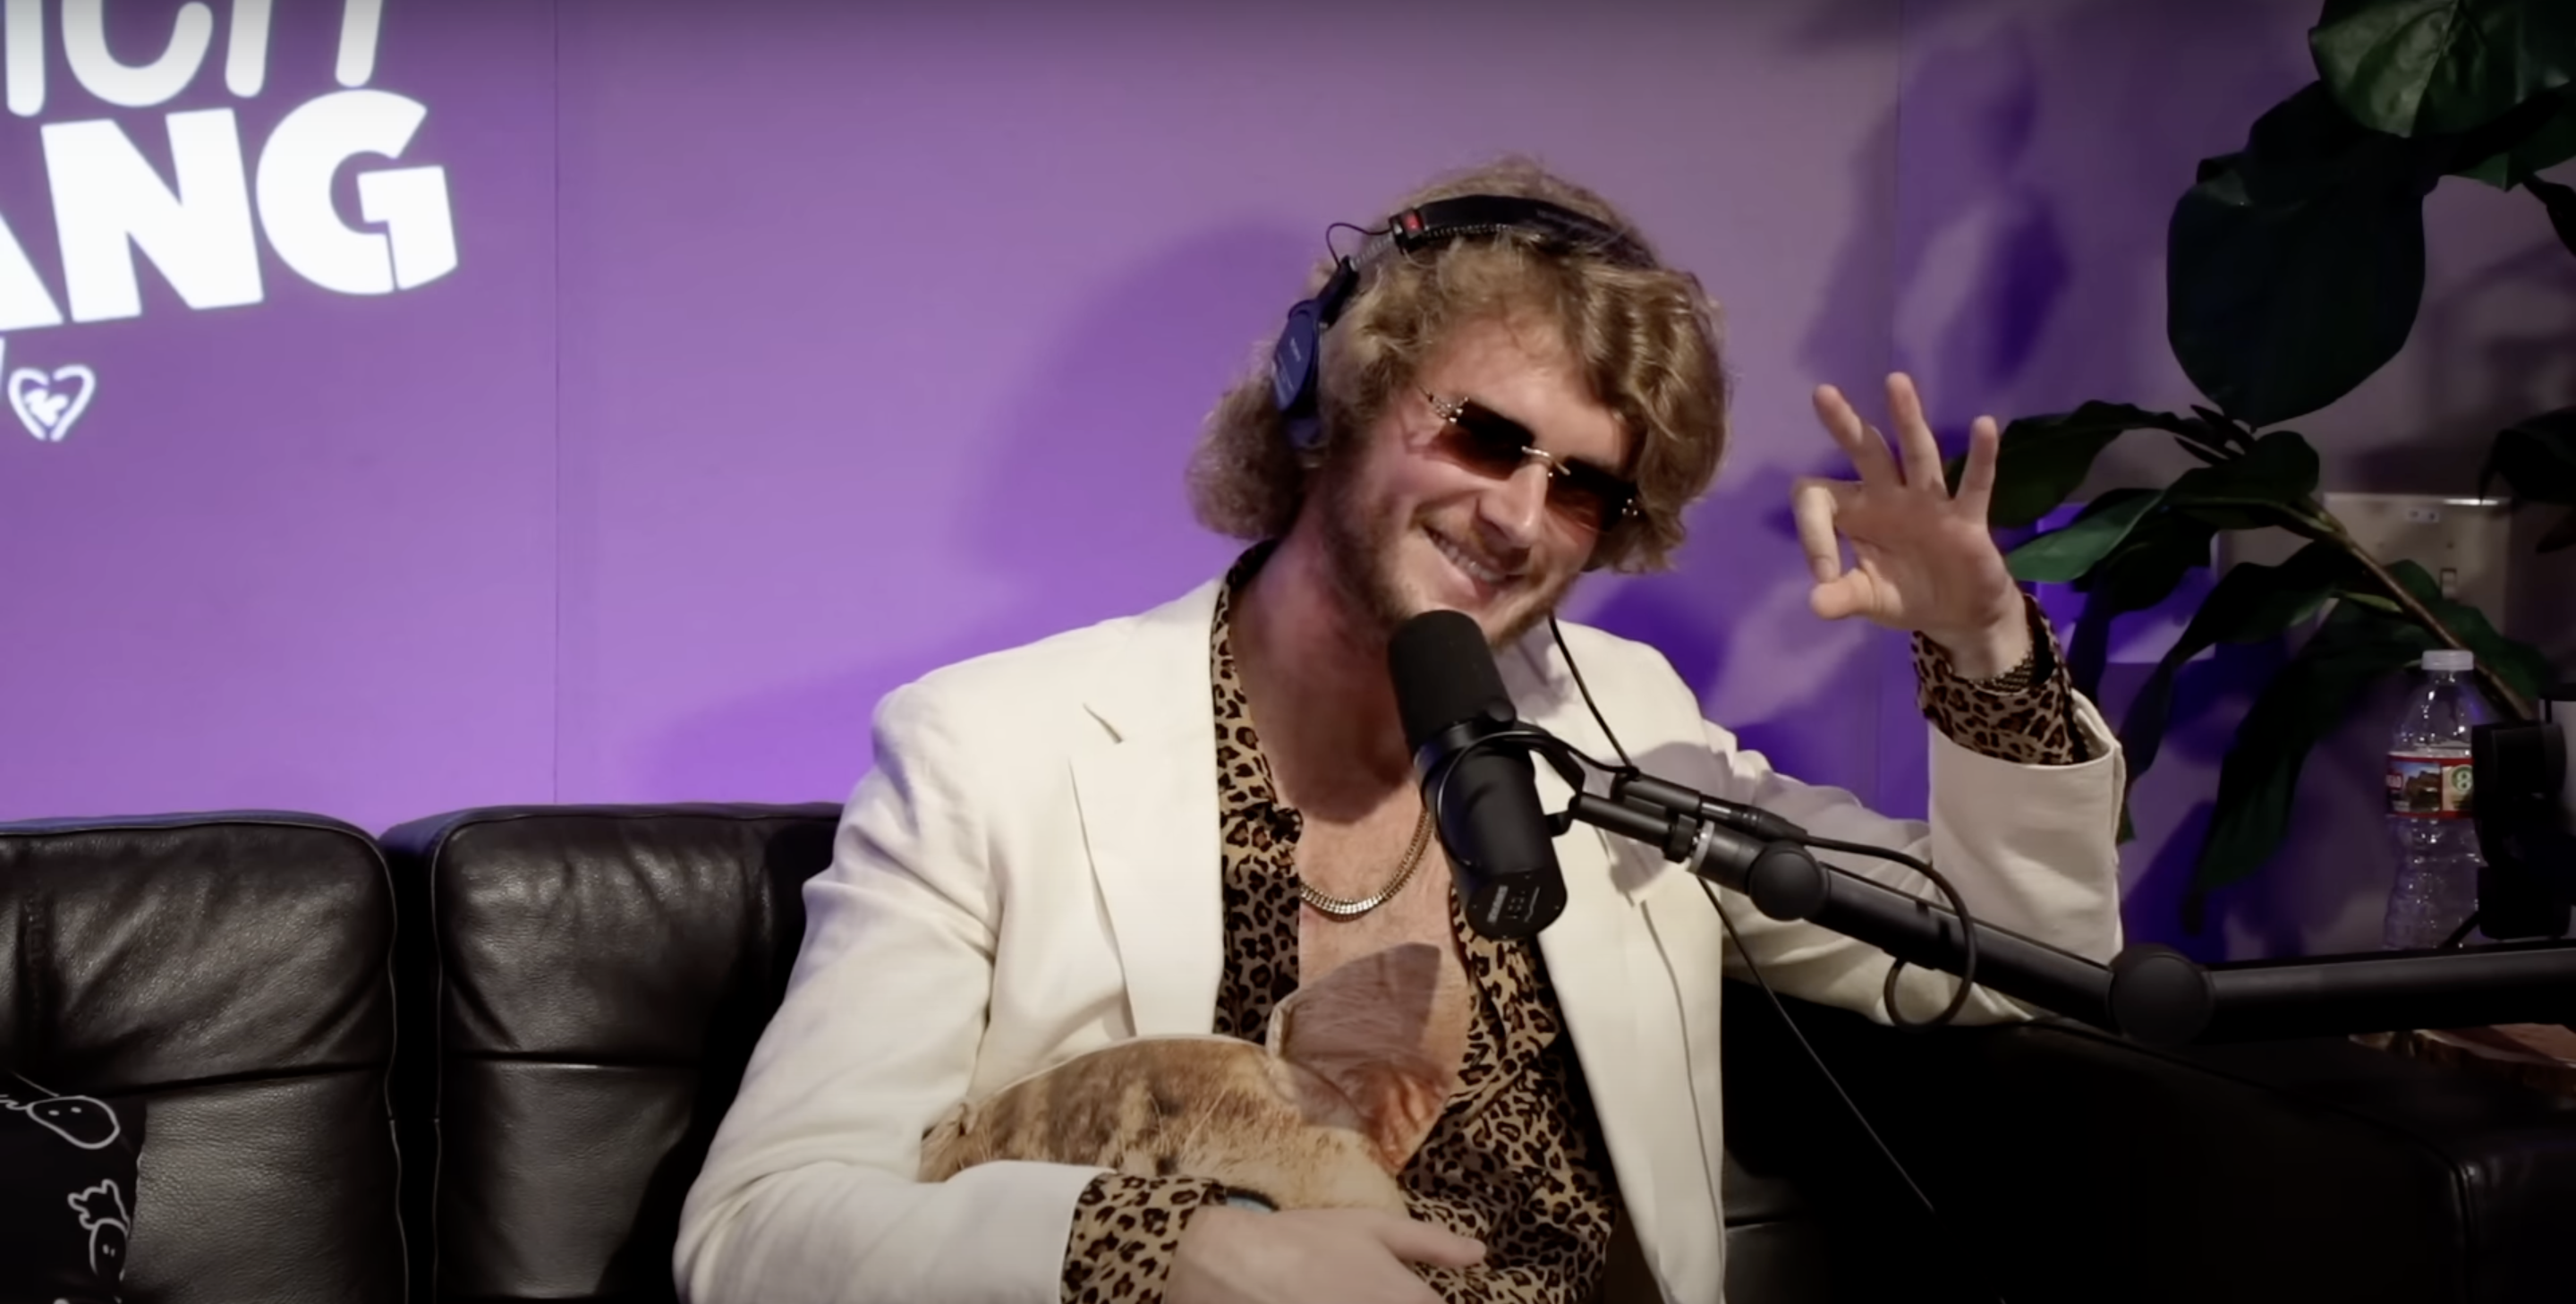 Did You Know that Yung Gravy is the Son of a Sleep Pioneer?